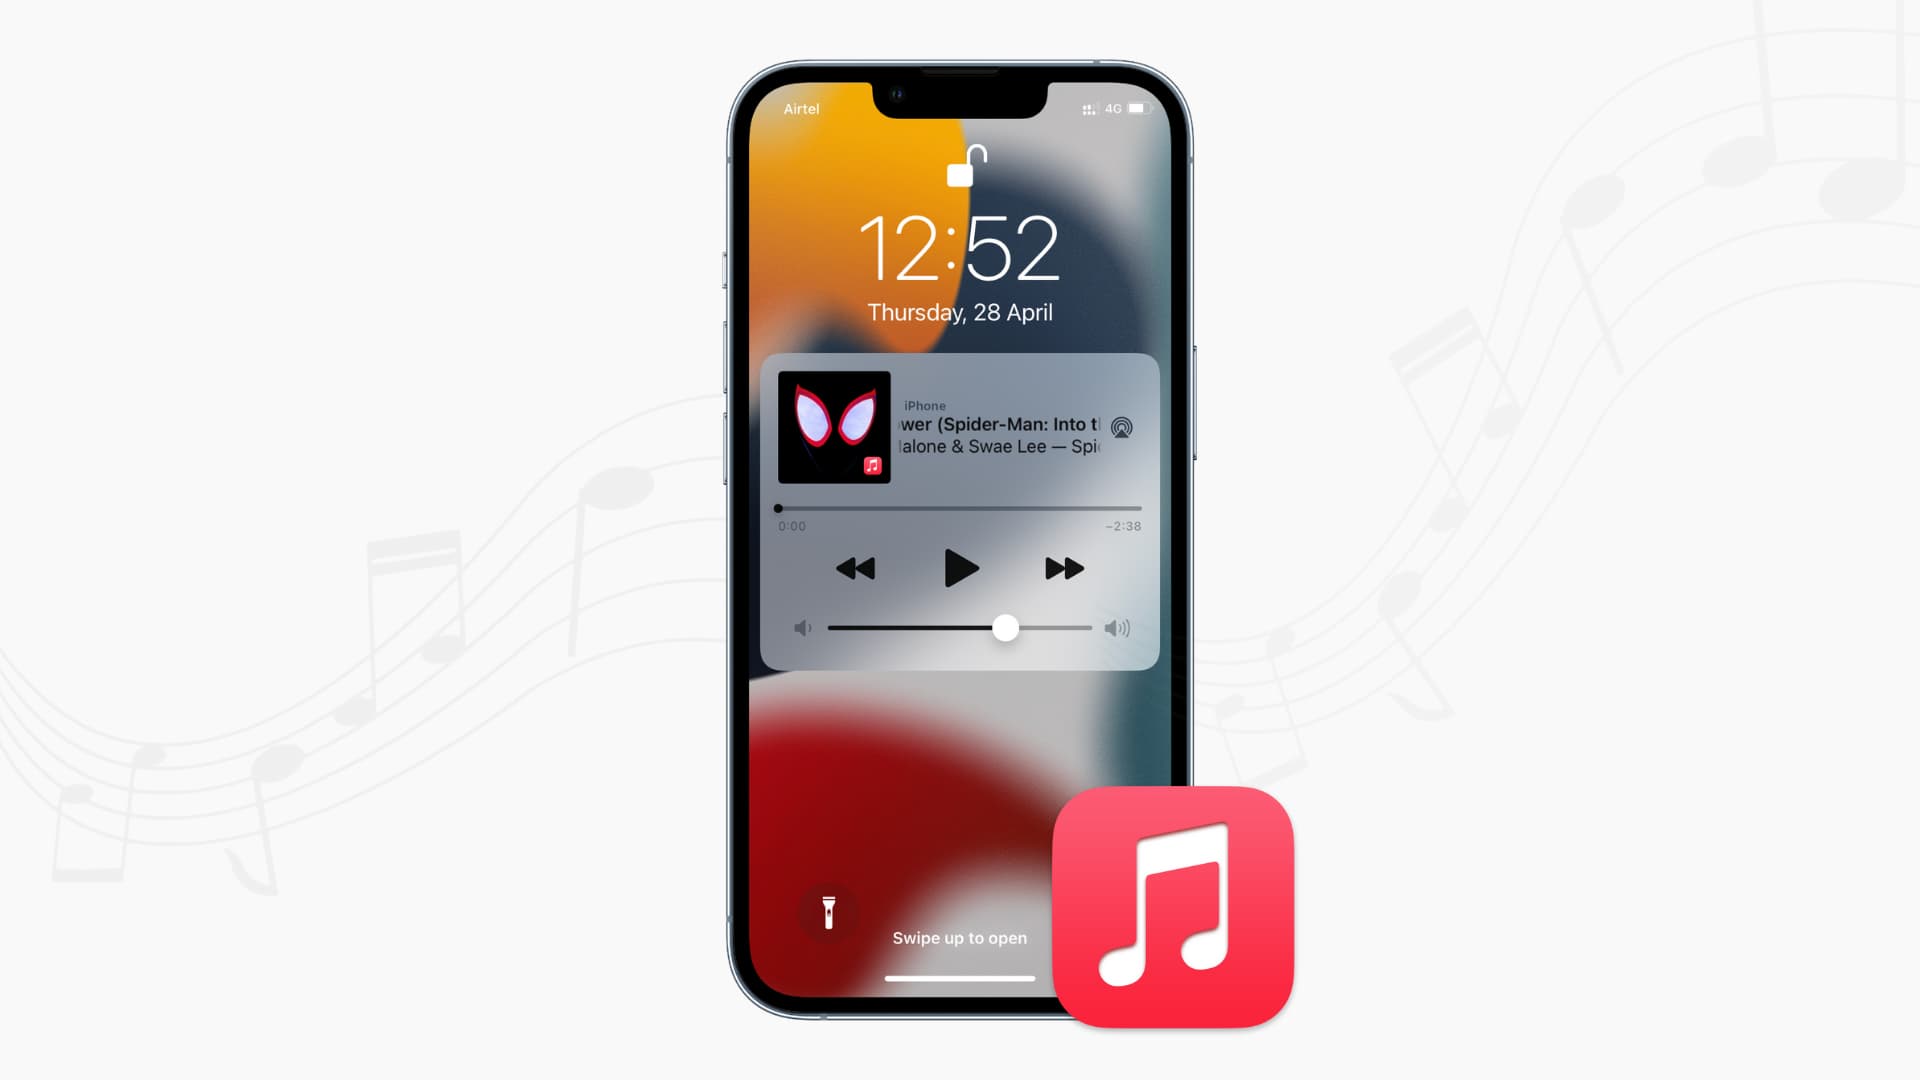 How to remove stuck music widget from iPhone Lock screen